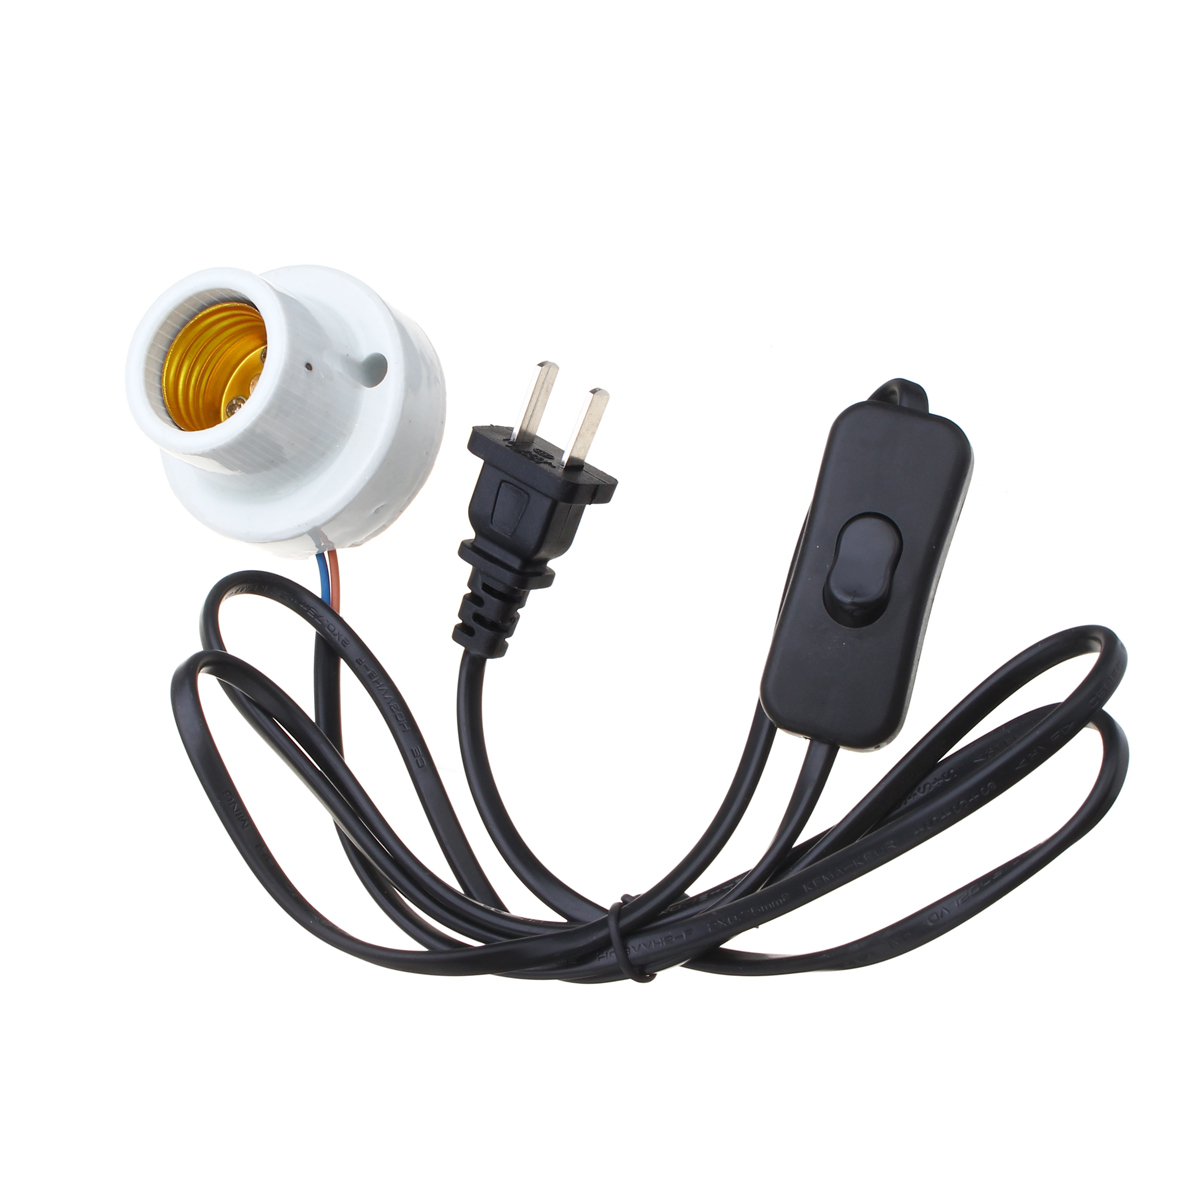 E27-Straight-Mouth-Reptile-Ceramic-Heat-Lampholder-Bulb-Adapter-with-Switch-AC110-240V-1287370-4